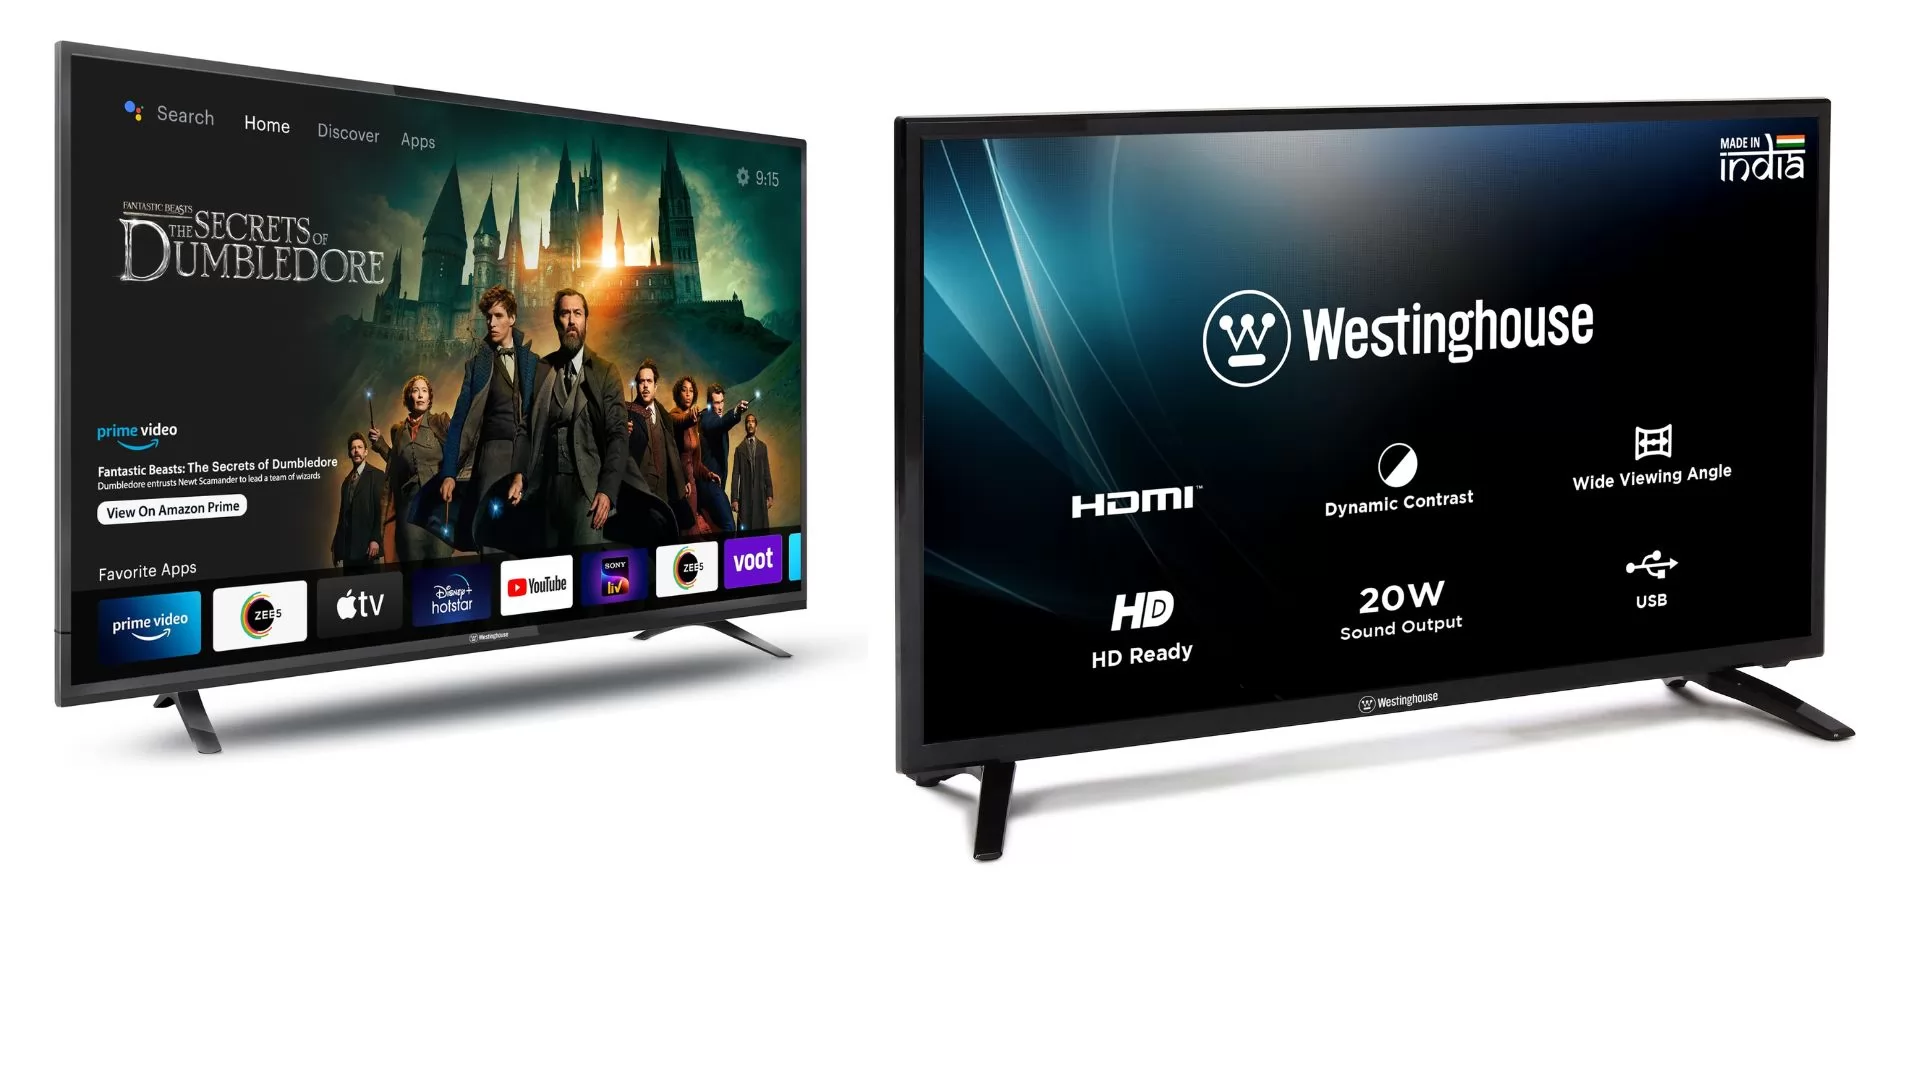 Westinghouse 32-inch HD Android LED TV